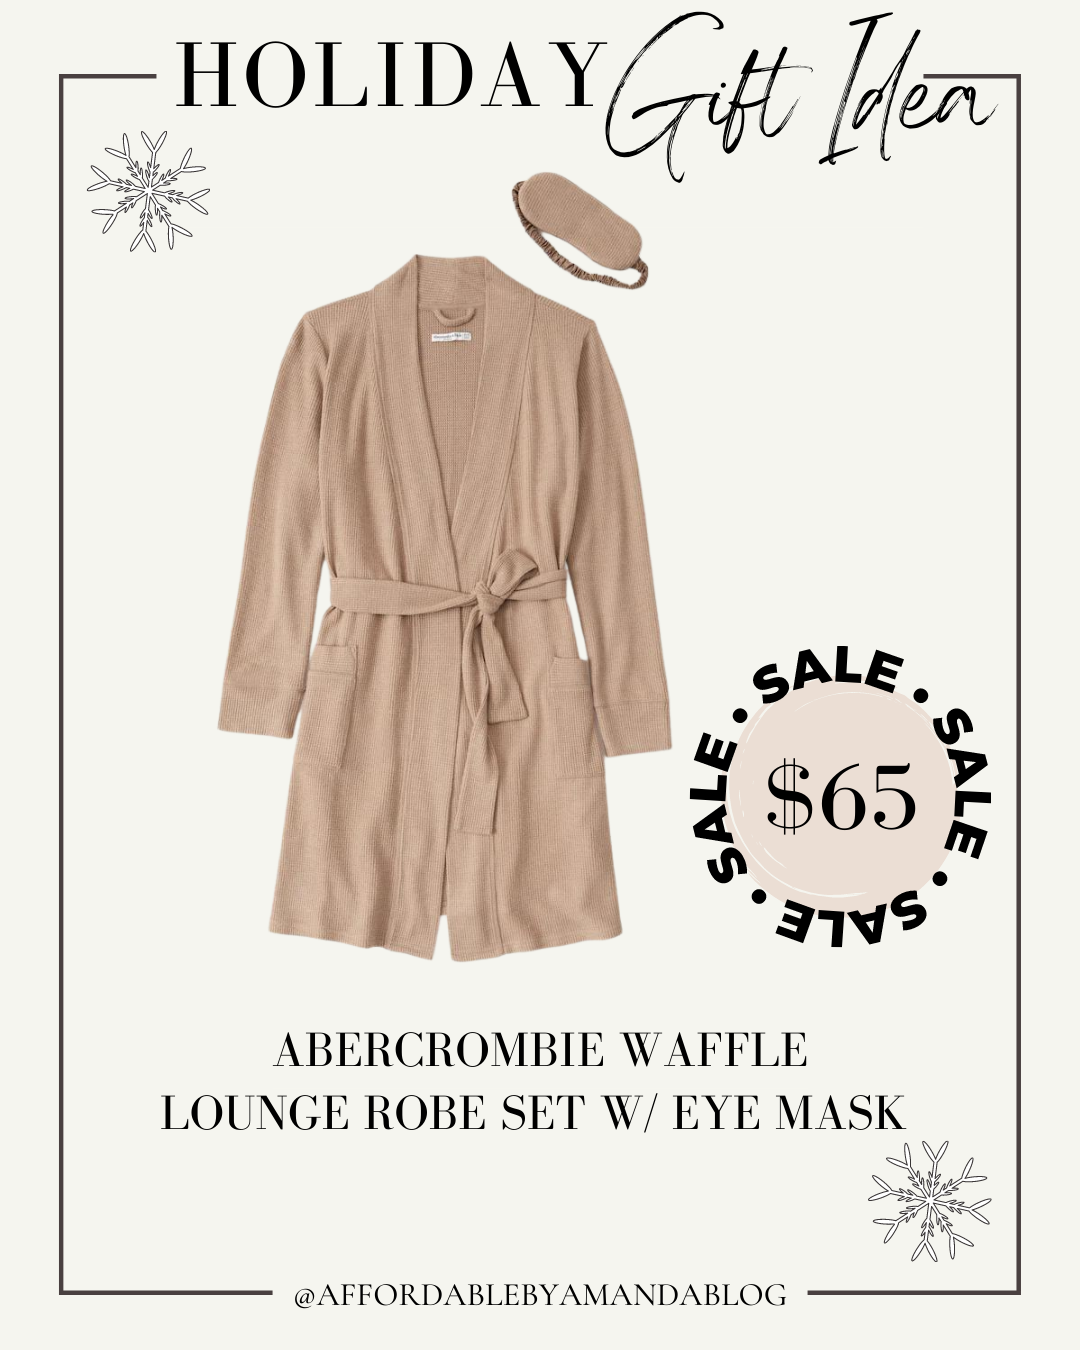 Gifts Under $100. Abercrombie & Fitch Women's Waffle Lounge Robe - Affordable by Amanda